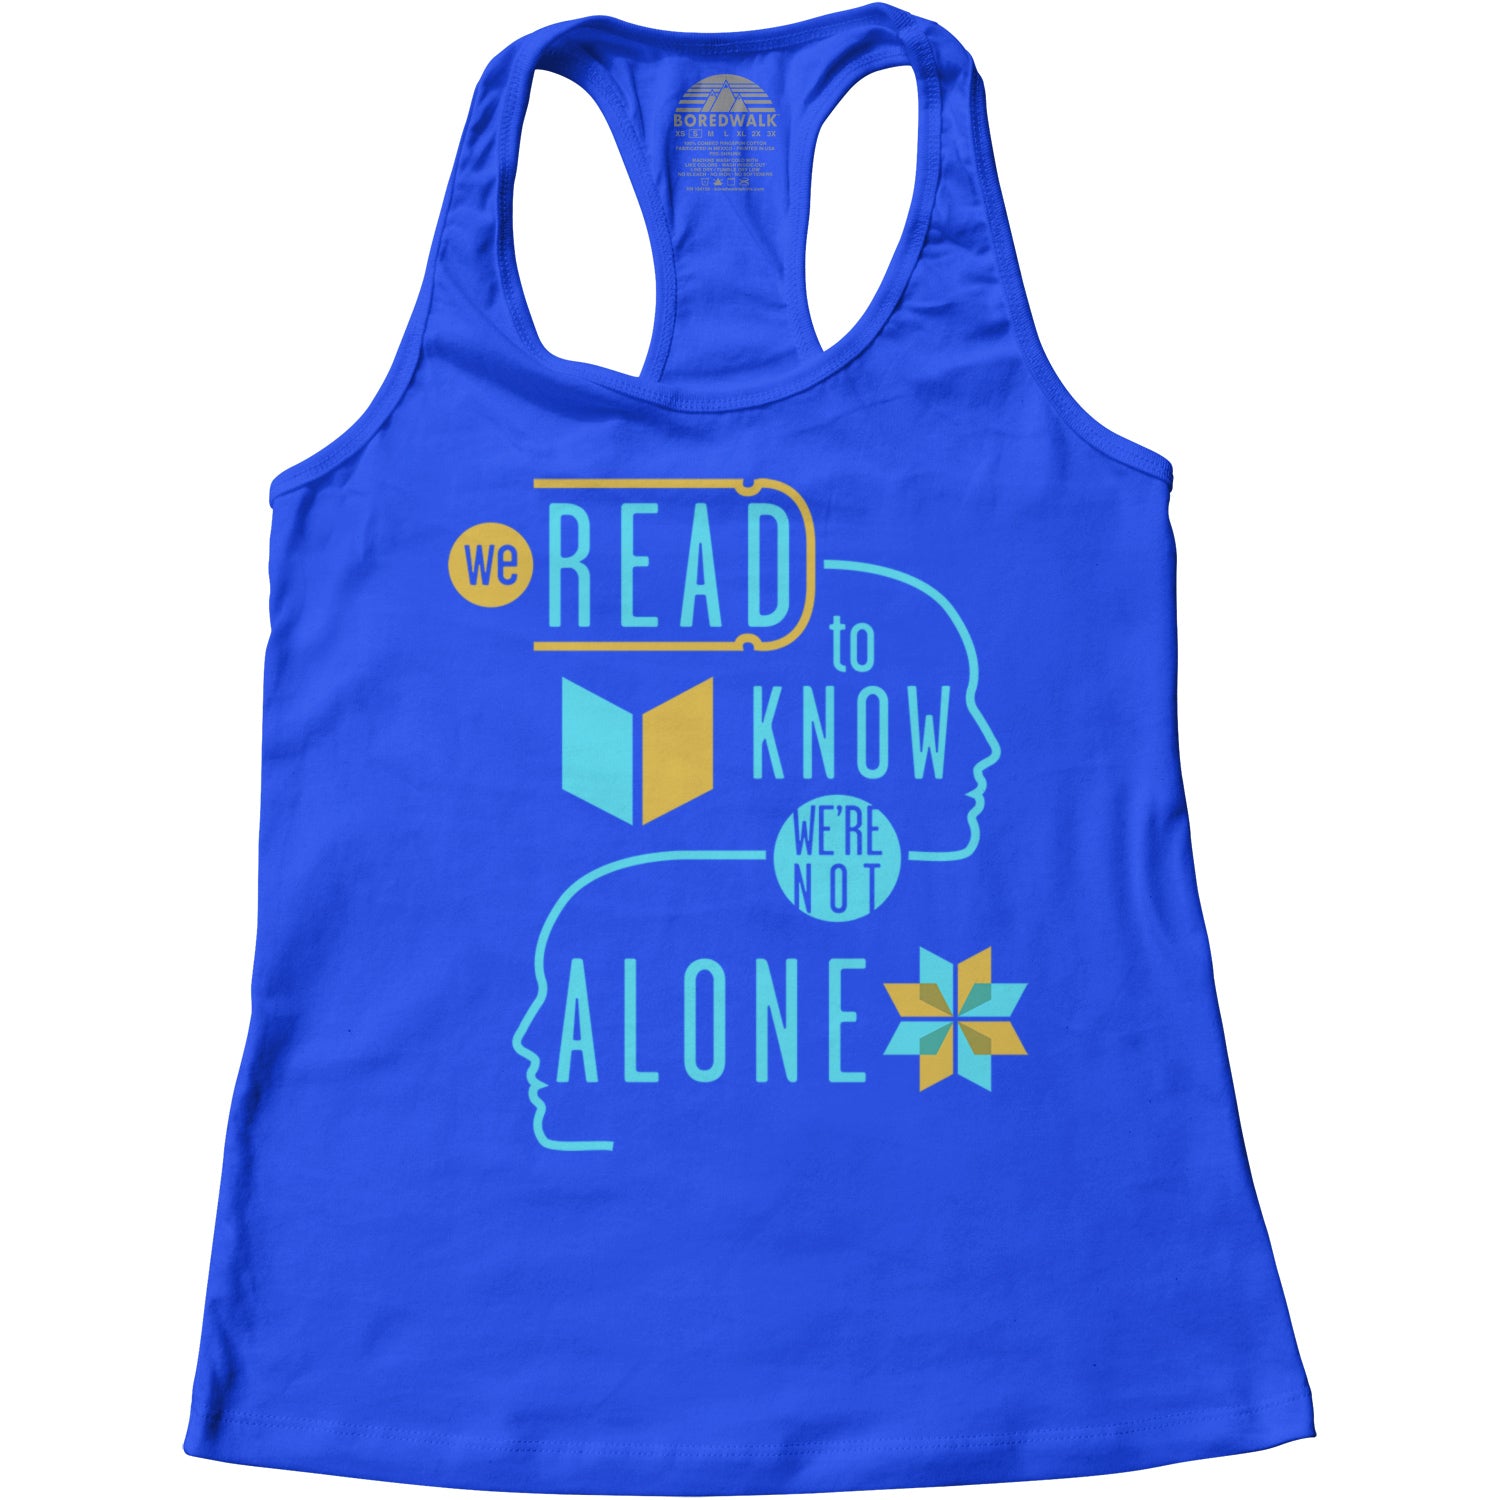 Women's We Read to Know We are Not Alone Racerback Tank Top